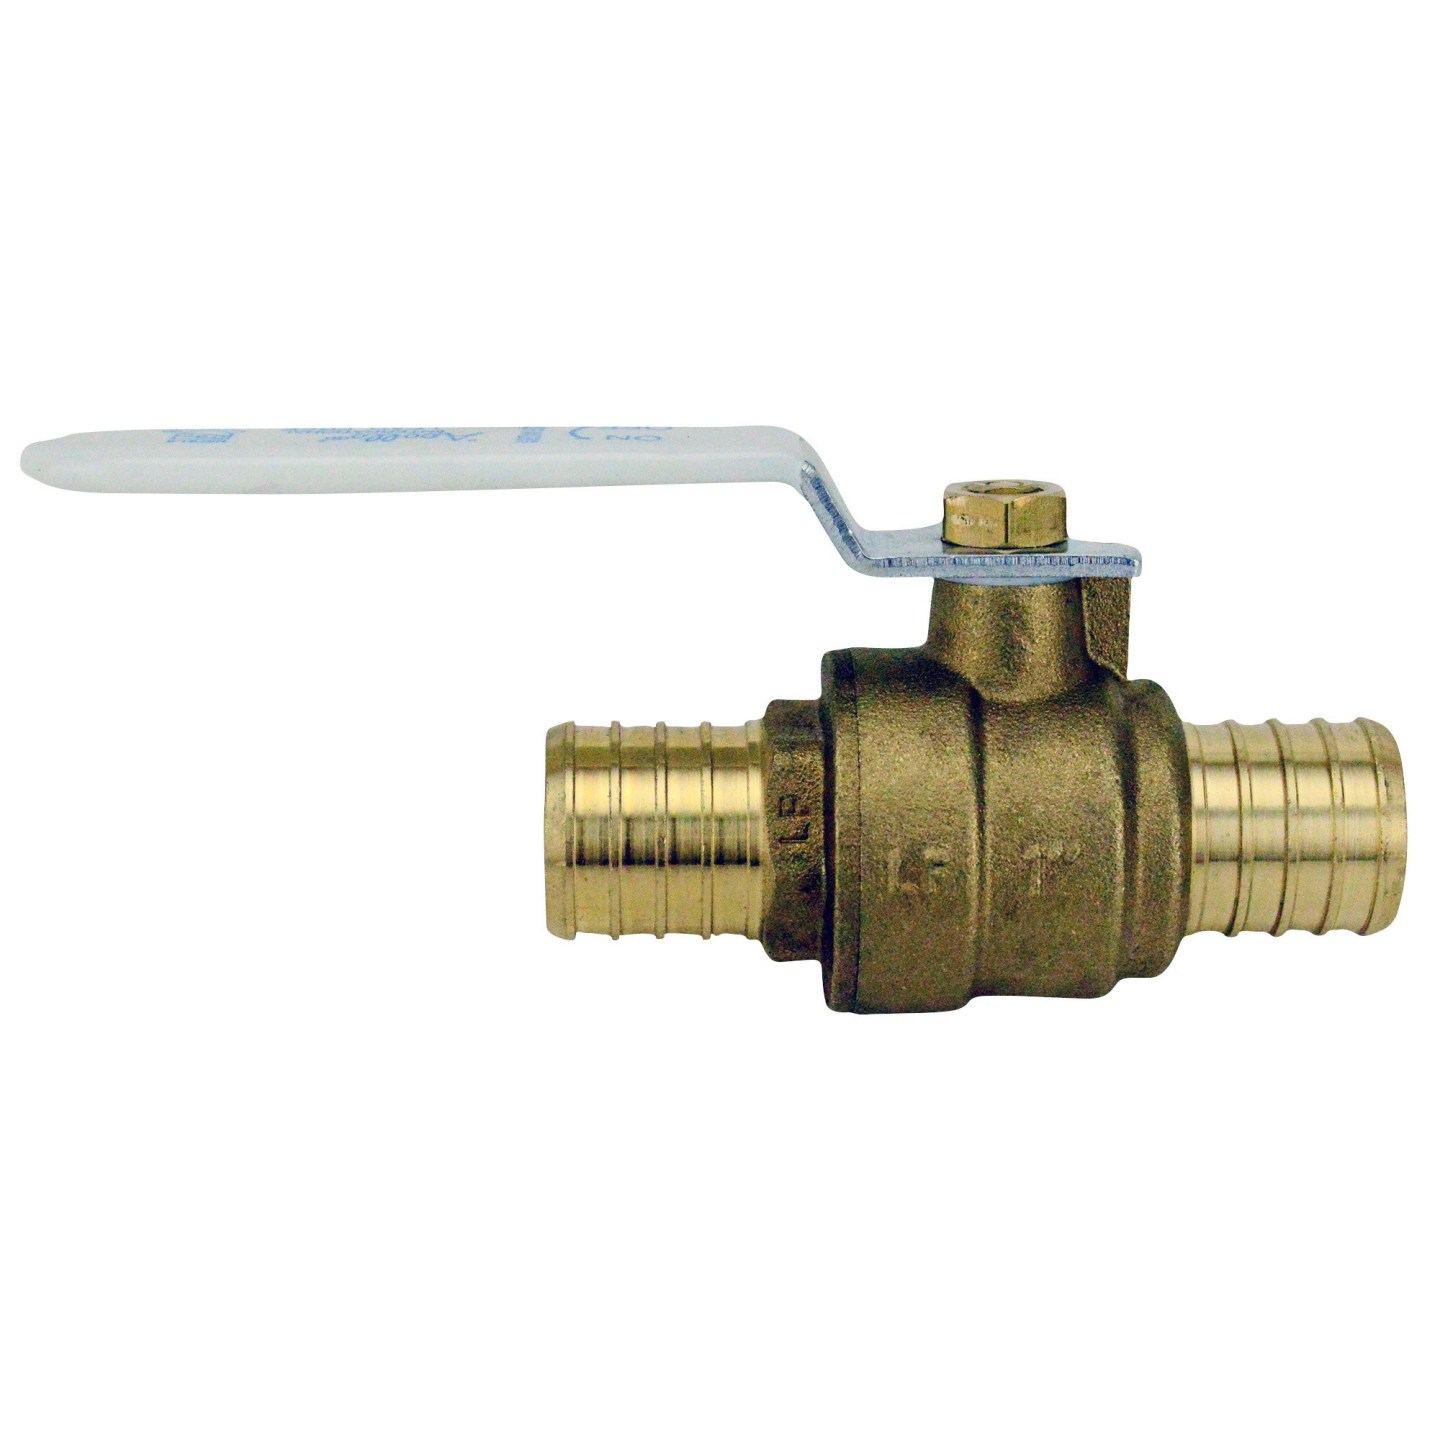 APXV11 Ball Valve, 1 in Connection, Barb, 200 psi Pressure, Brass Body